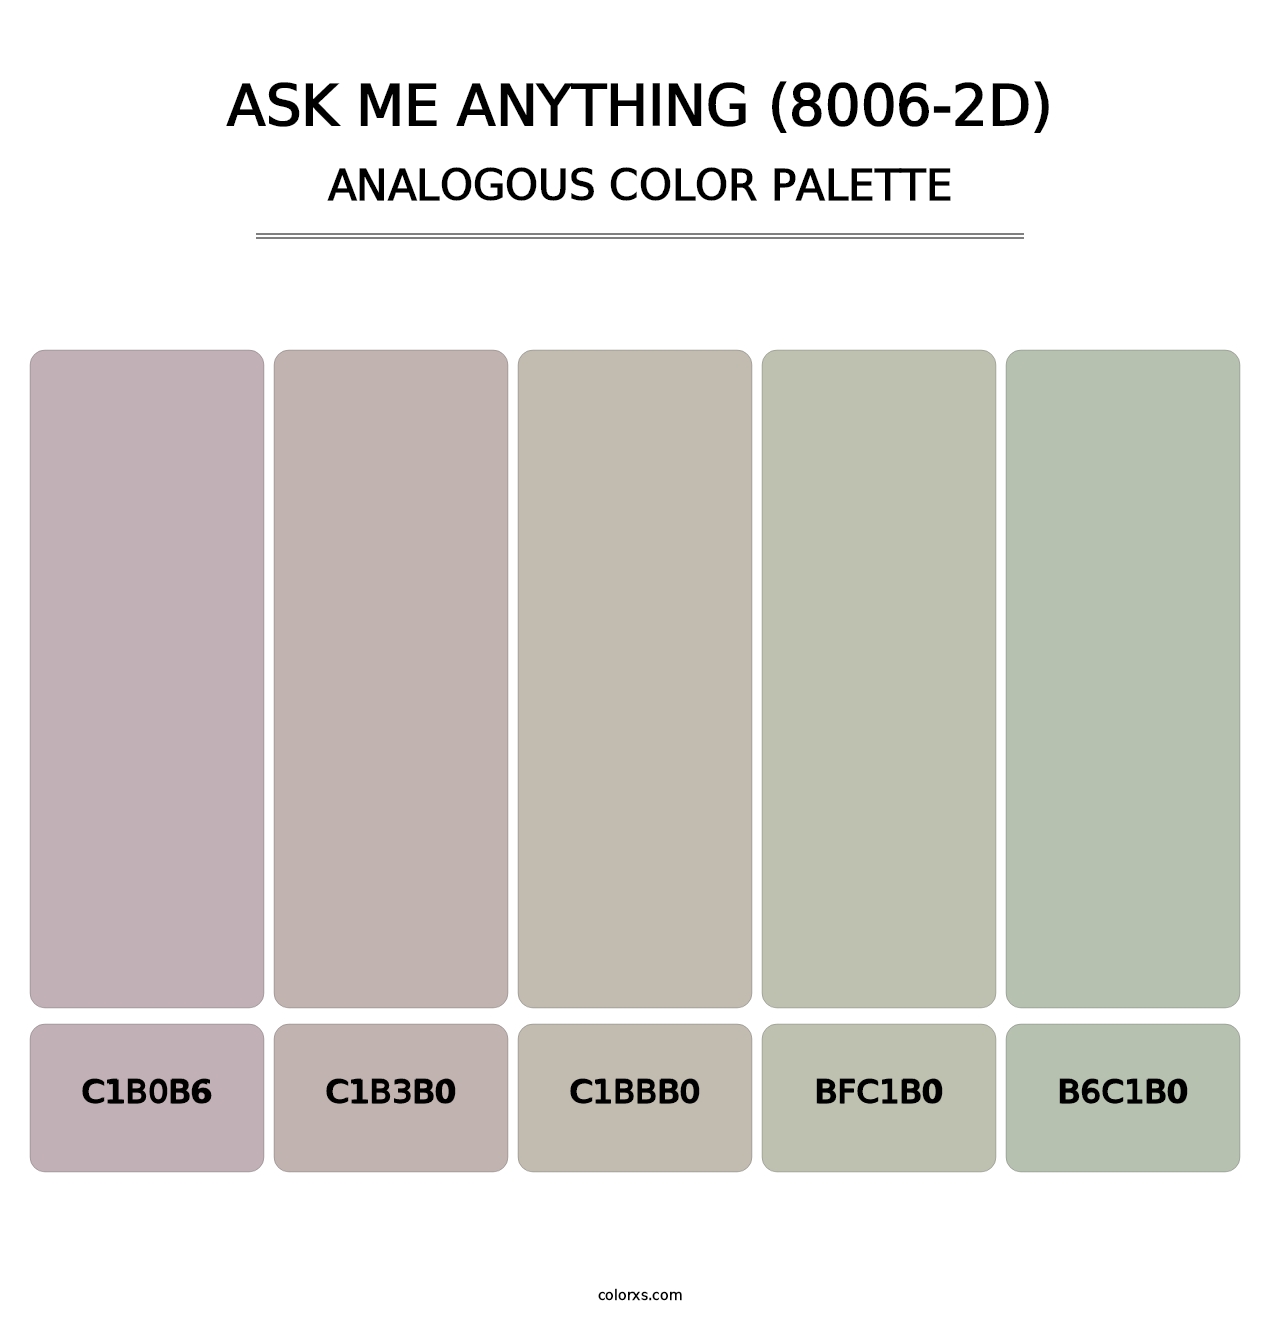 Ask Me Anything (8006-2D) - Analogous Color Palette